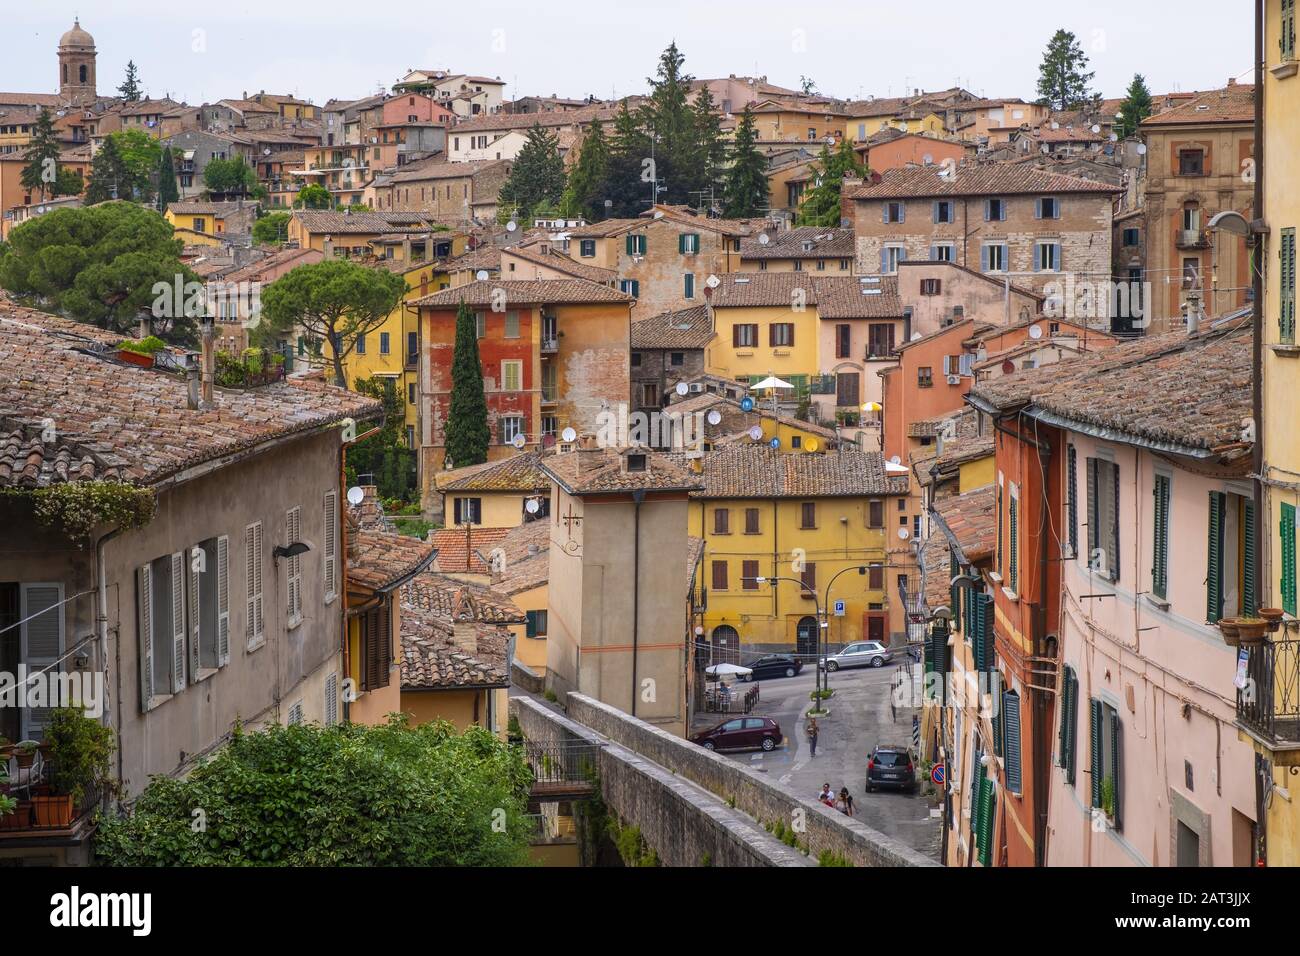 Perugia, Umbria / Italy - 2018/05/28: Panoramic view of the historic aqueduct forming Via dell Acquedotto pedestrian street along the ancient Via Appia street in Perugia historic quarter Stock Photo